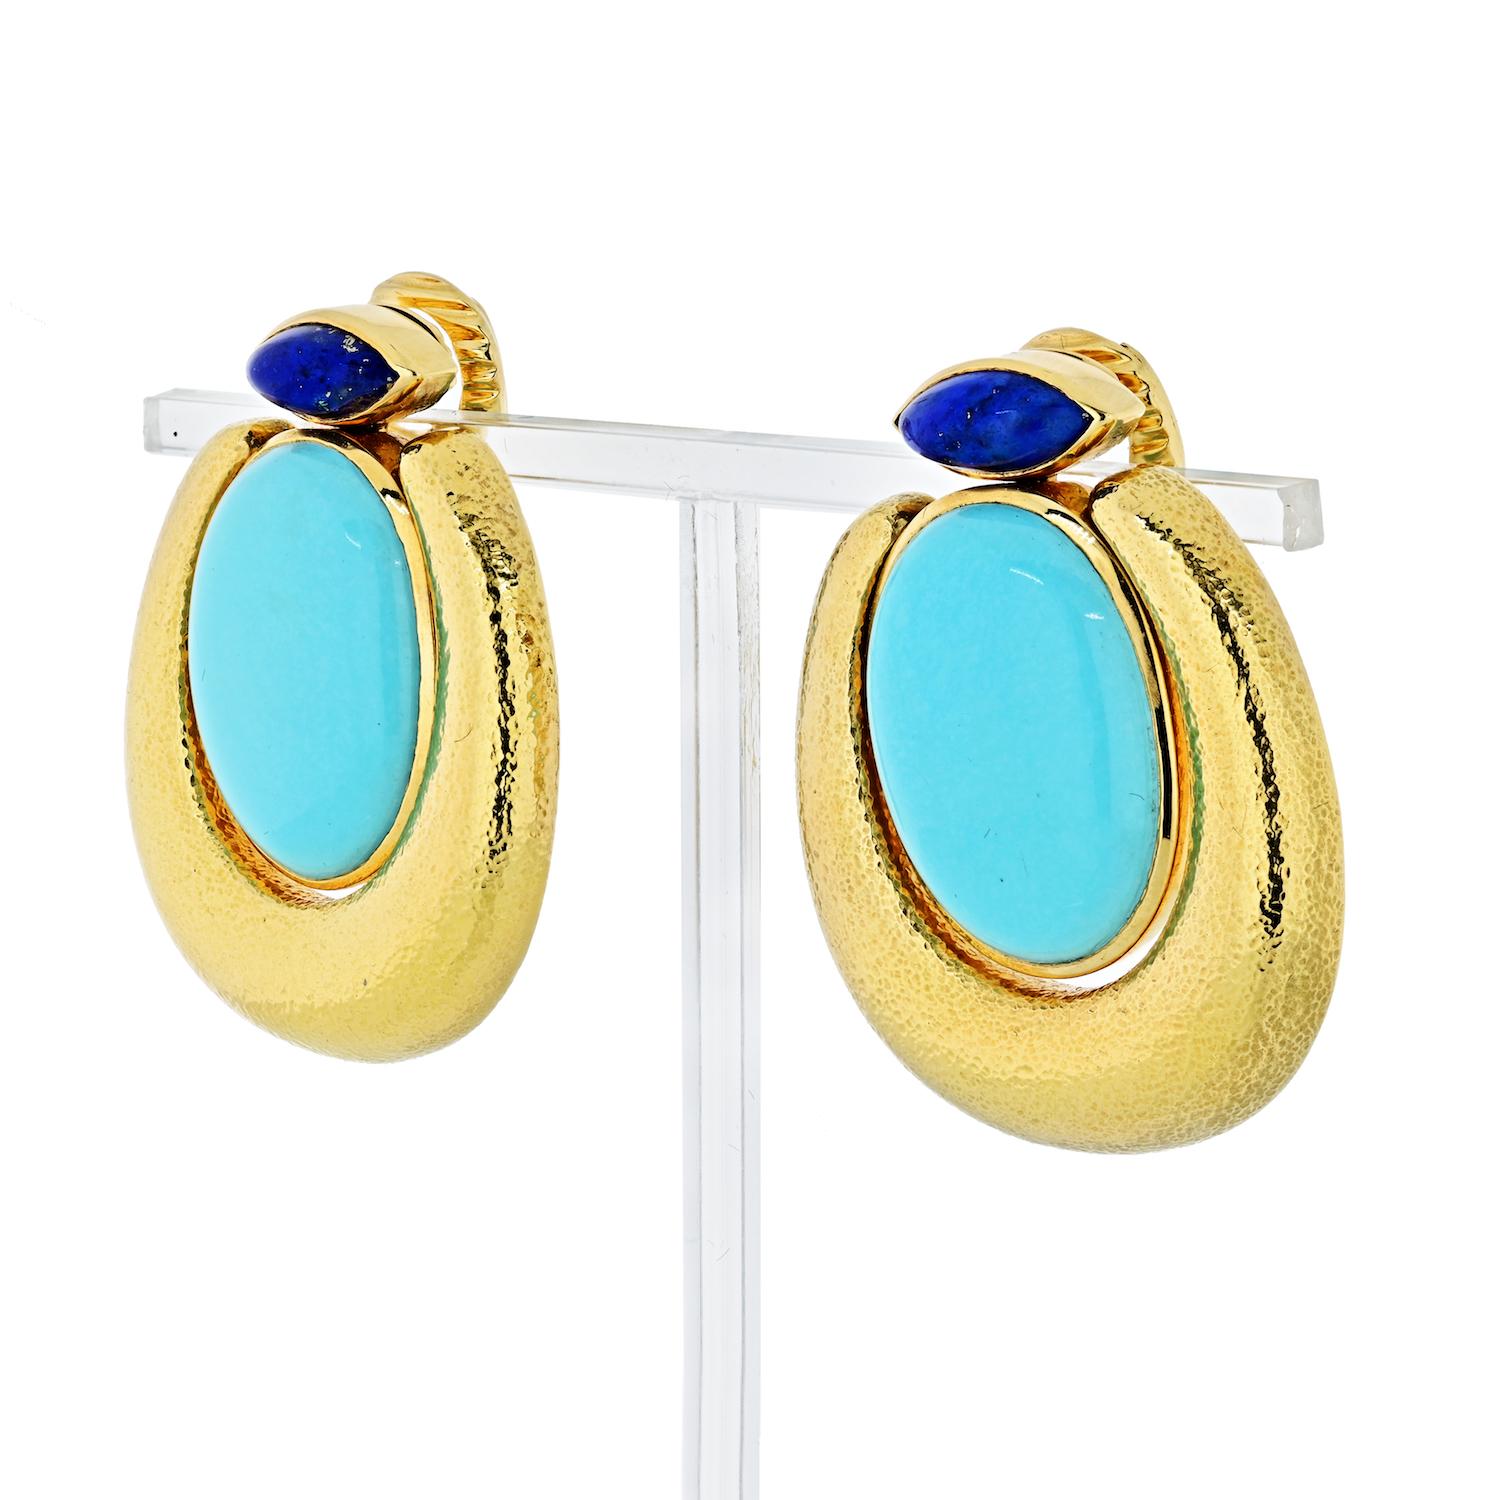 David Webb 18K Oval cabochon turquoise, marquise cabochon lapis lazuli, and hammered finish. This is a clip on earring for non-pierced ears.

MATERIAL: 18K Yellow Gold
DIMENSIONS: 41mm long x 33mm wide
GRAMS: 56gr
CONDITION: Excellent